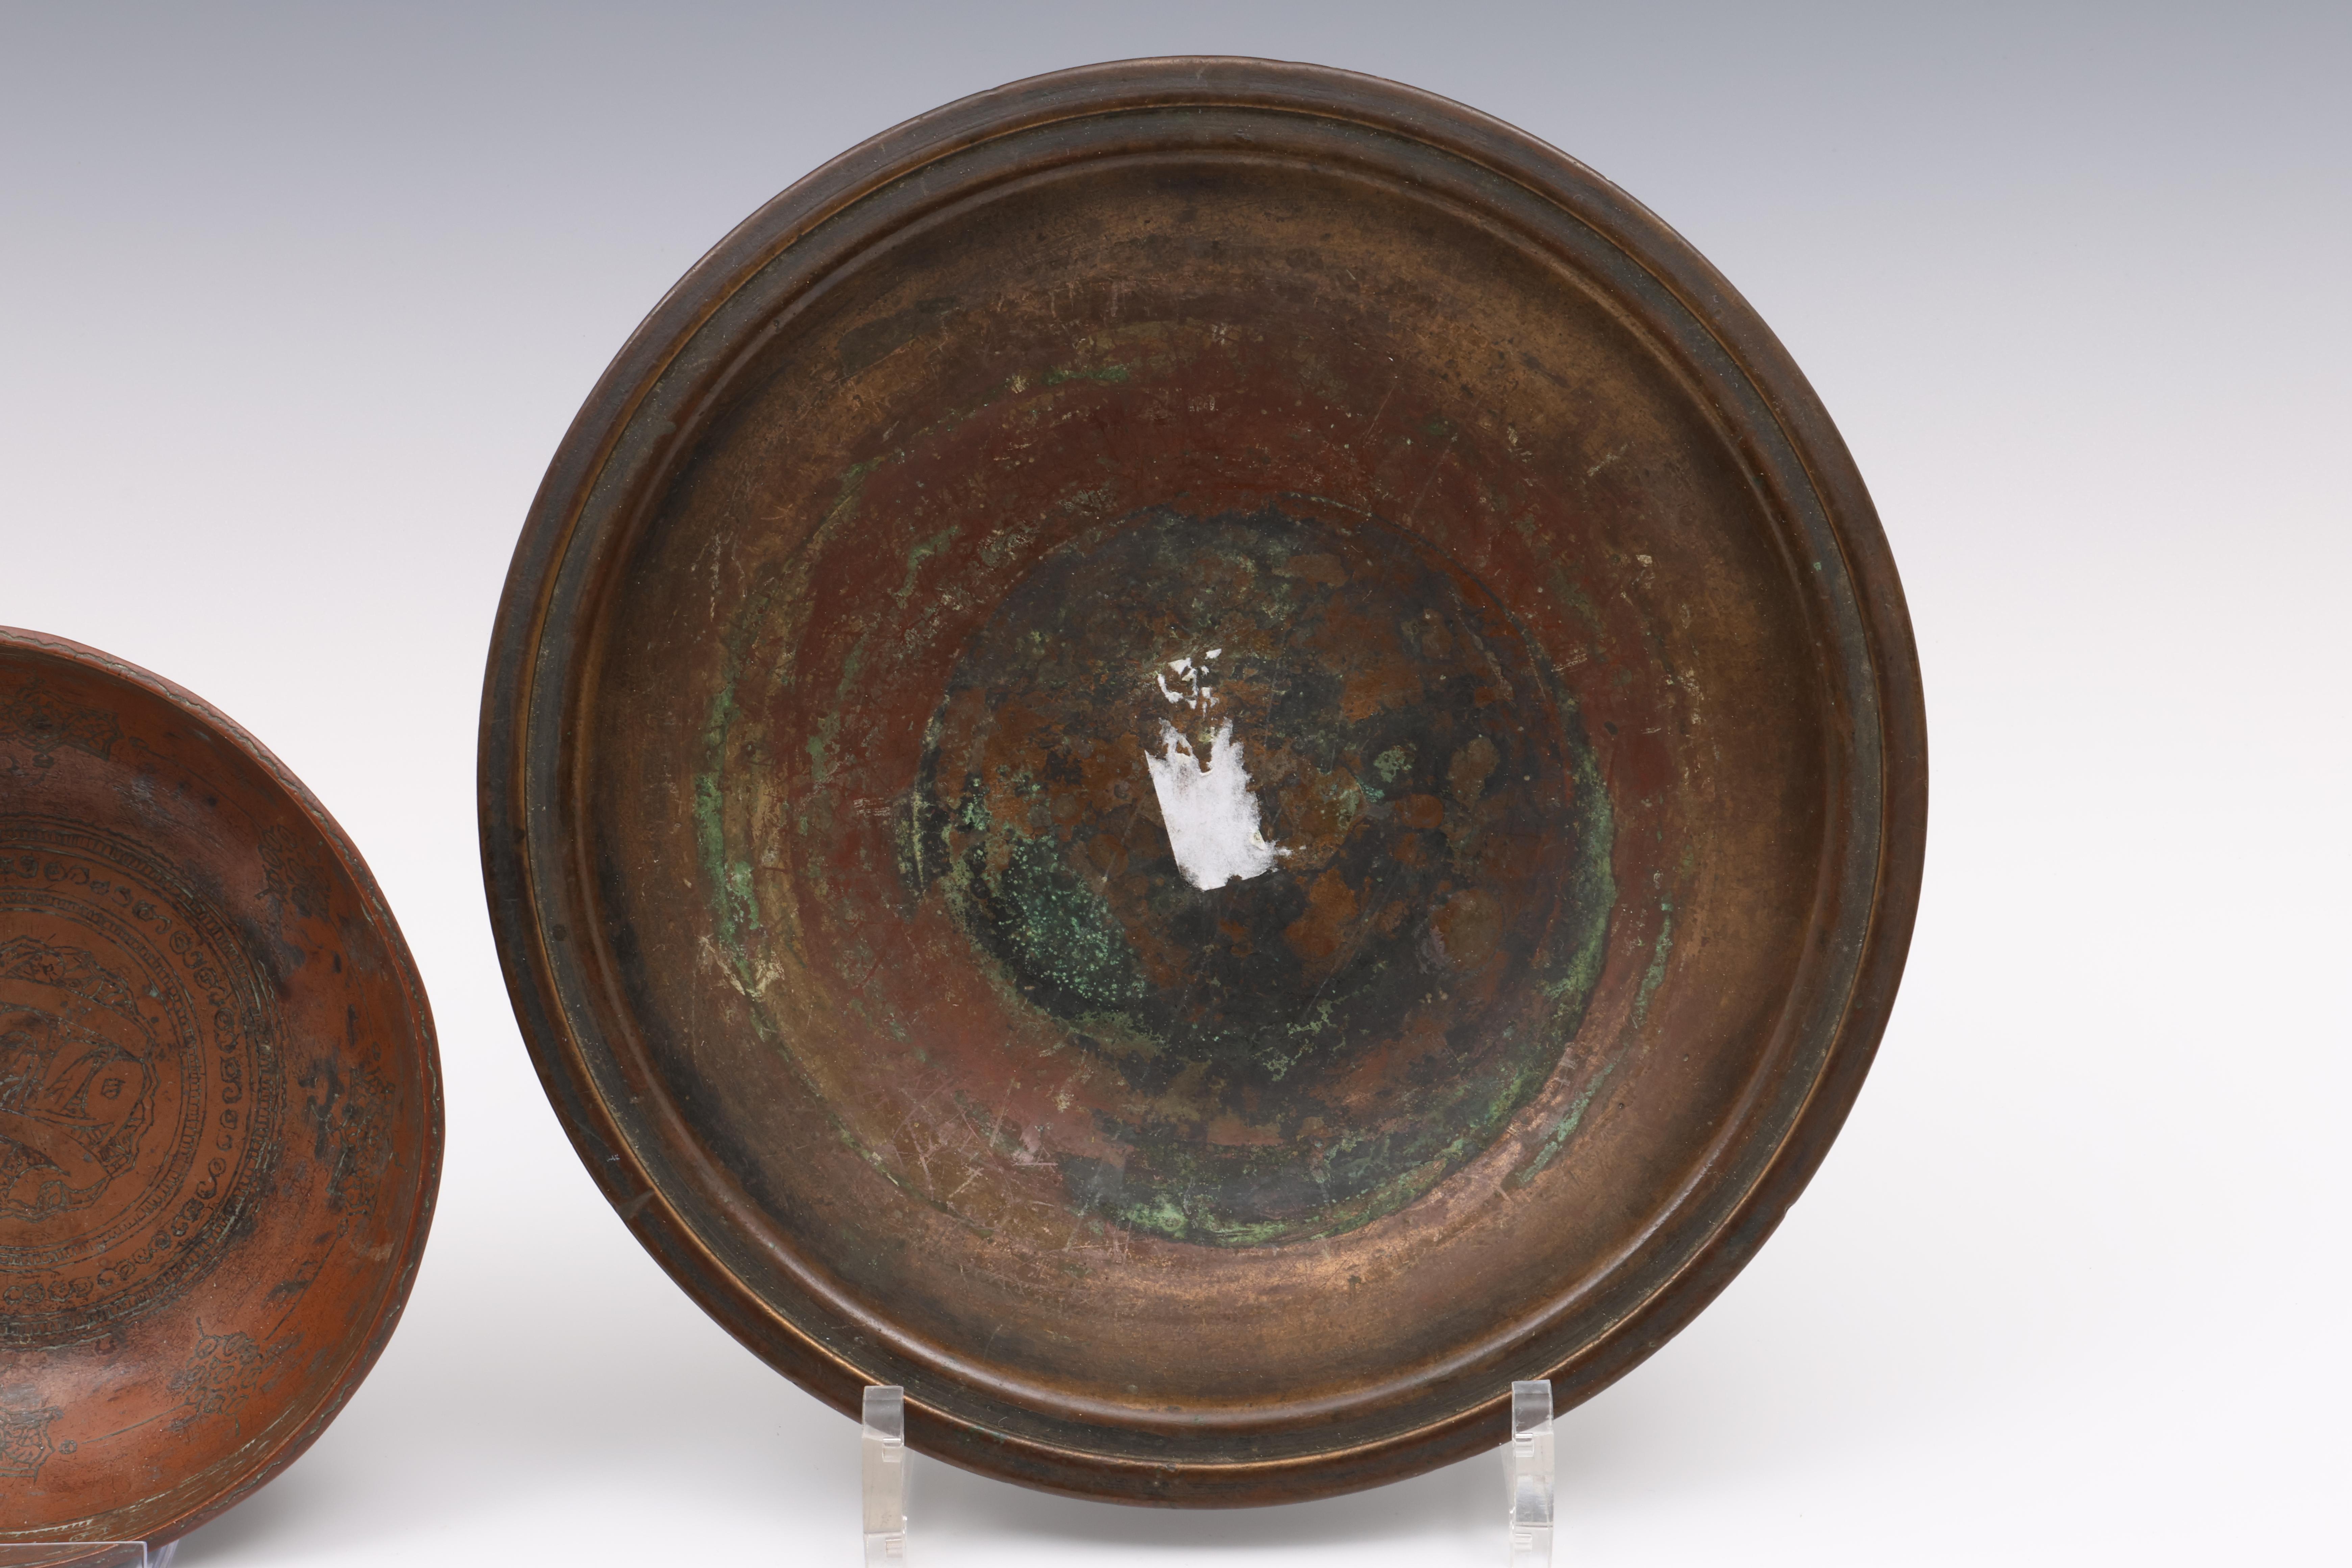 Six Persian and Ottoman bronze bowls, 11th - 17th century; - Image 3 of 5